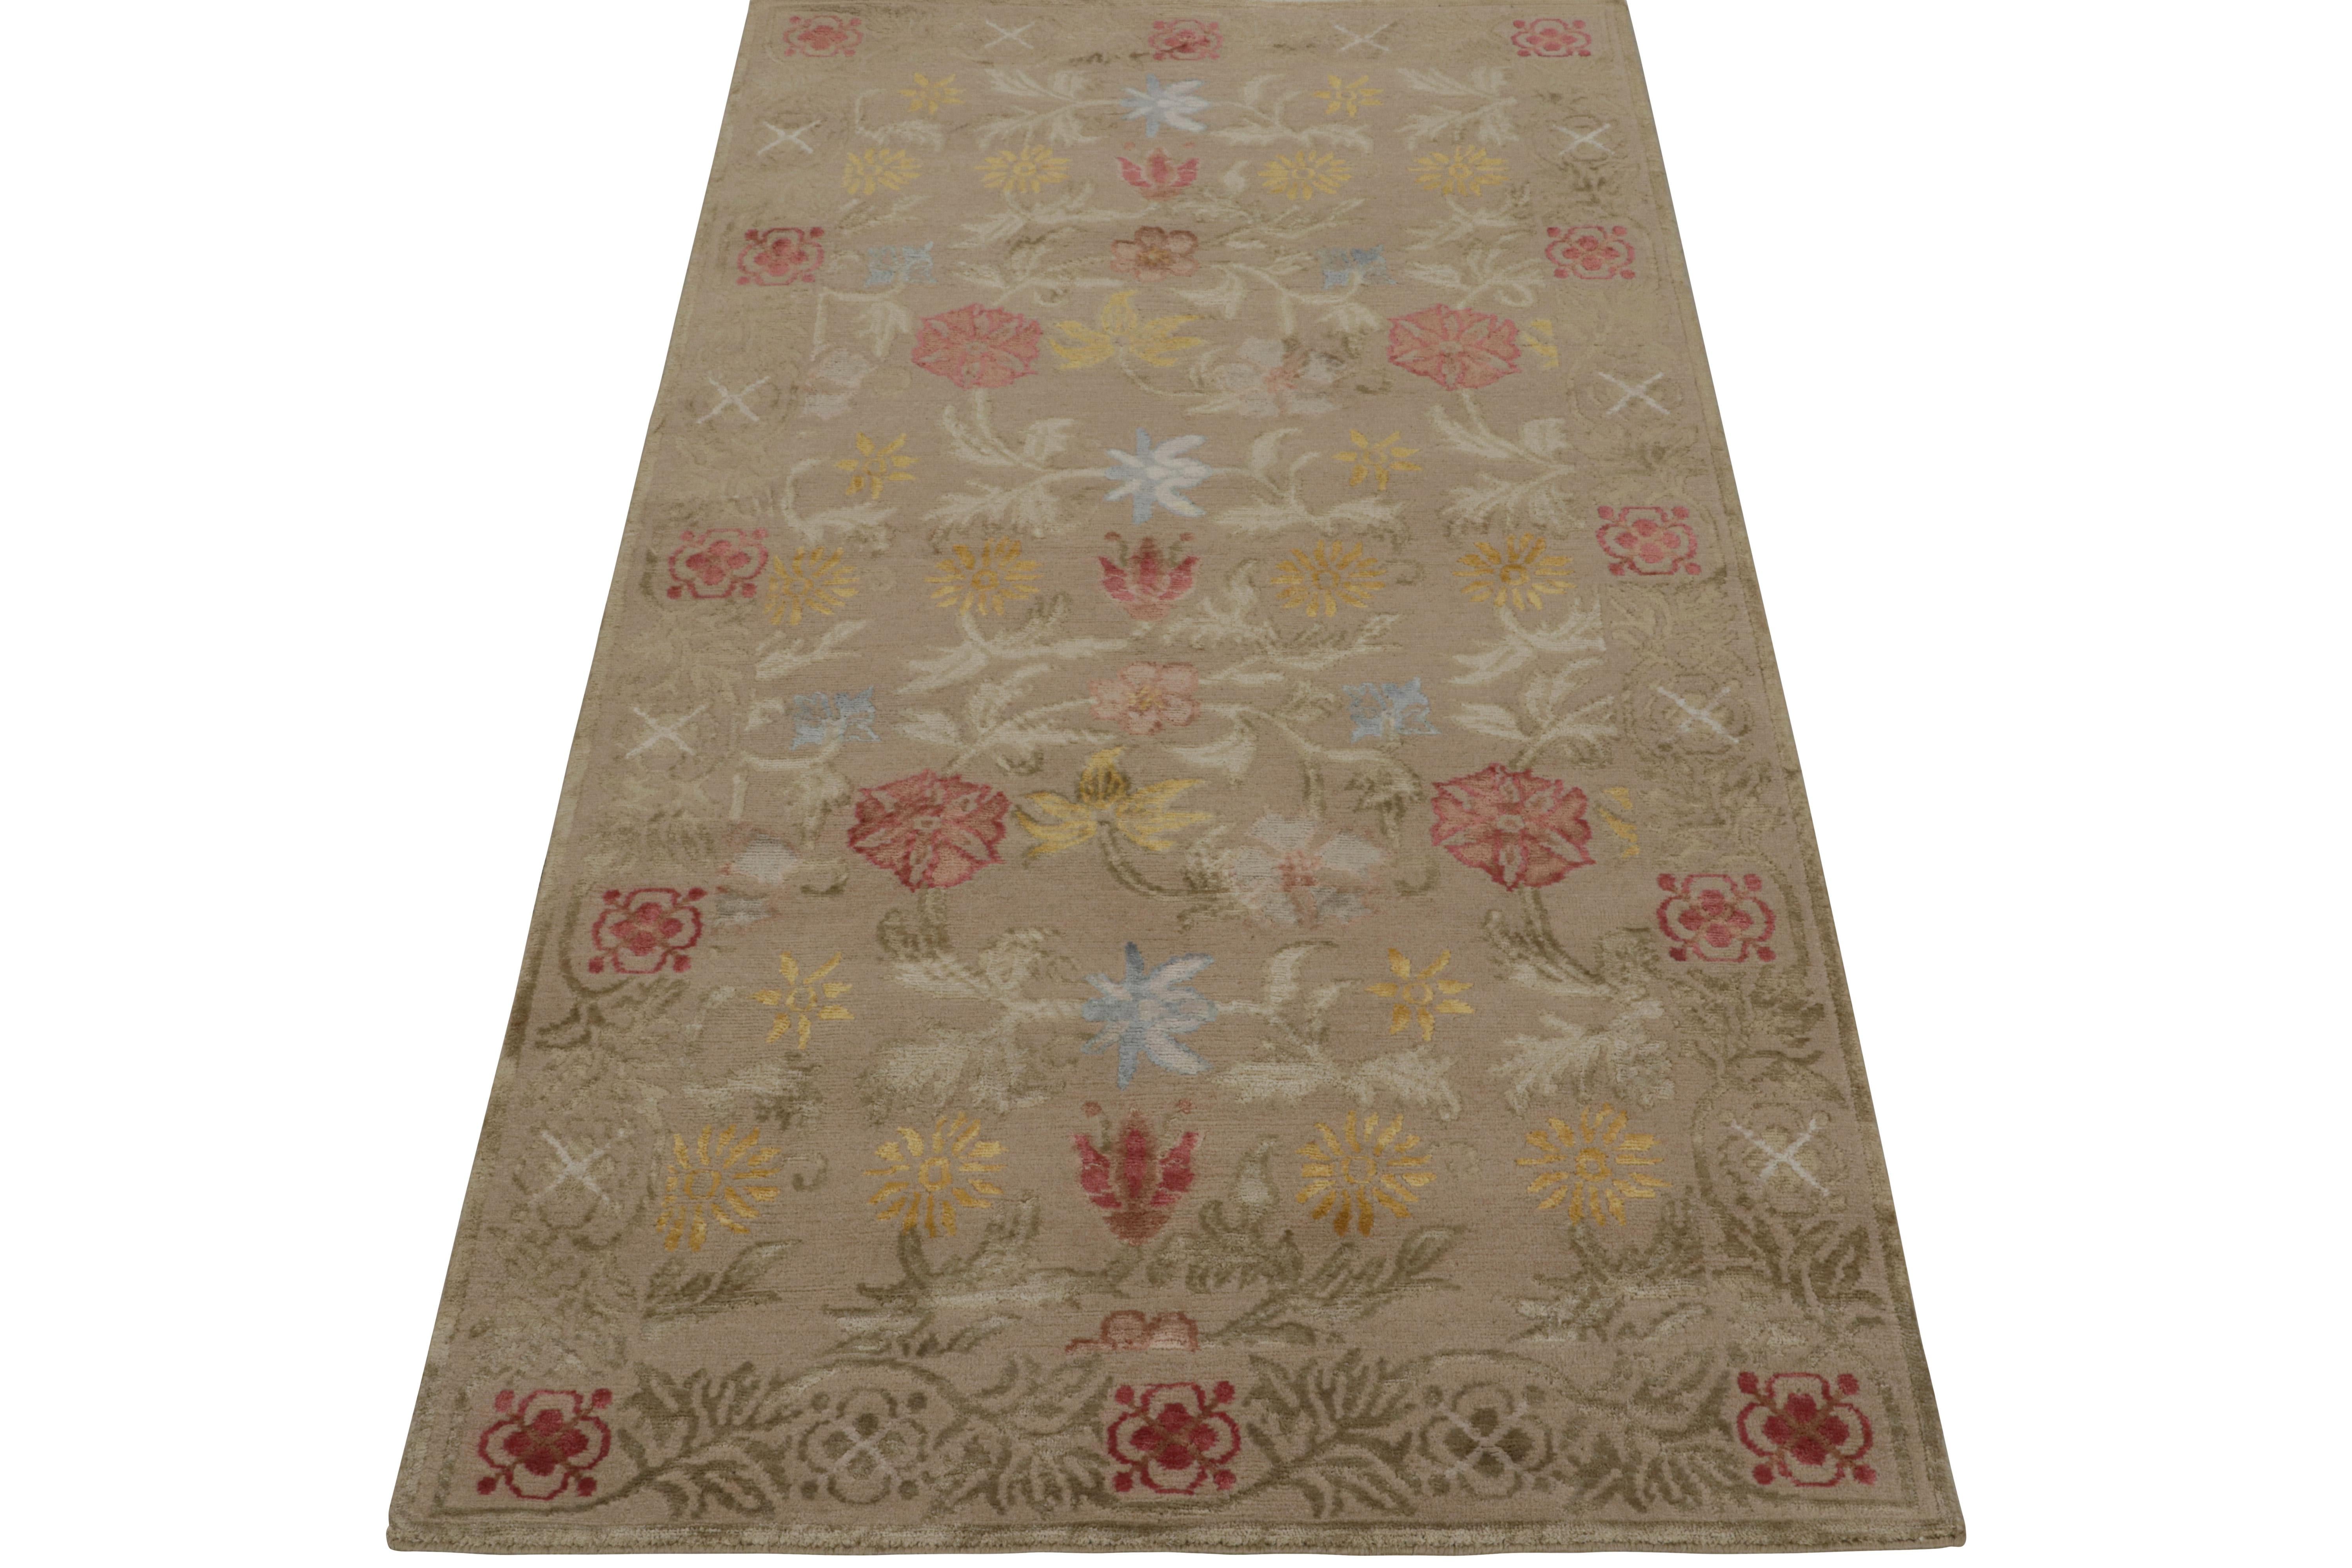 Modern Rug & Kilim’s Spanish European Style Rug in Beige with Floral Patterns “Bilbao” For Sale